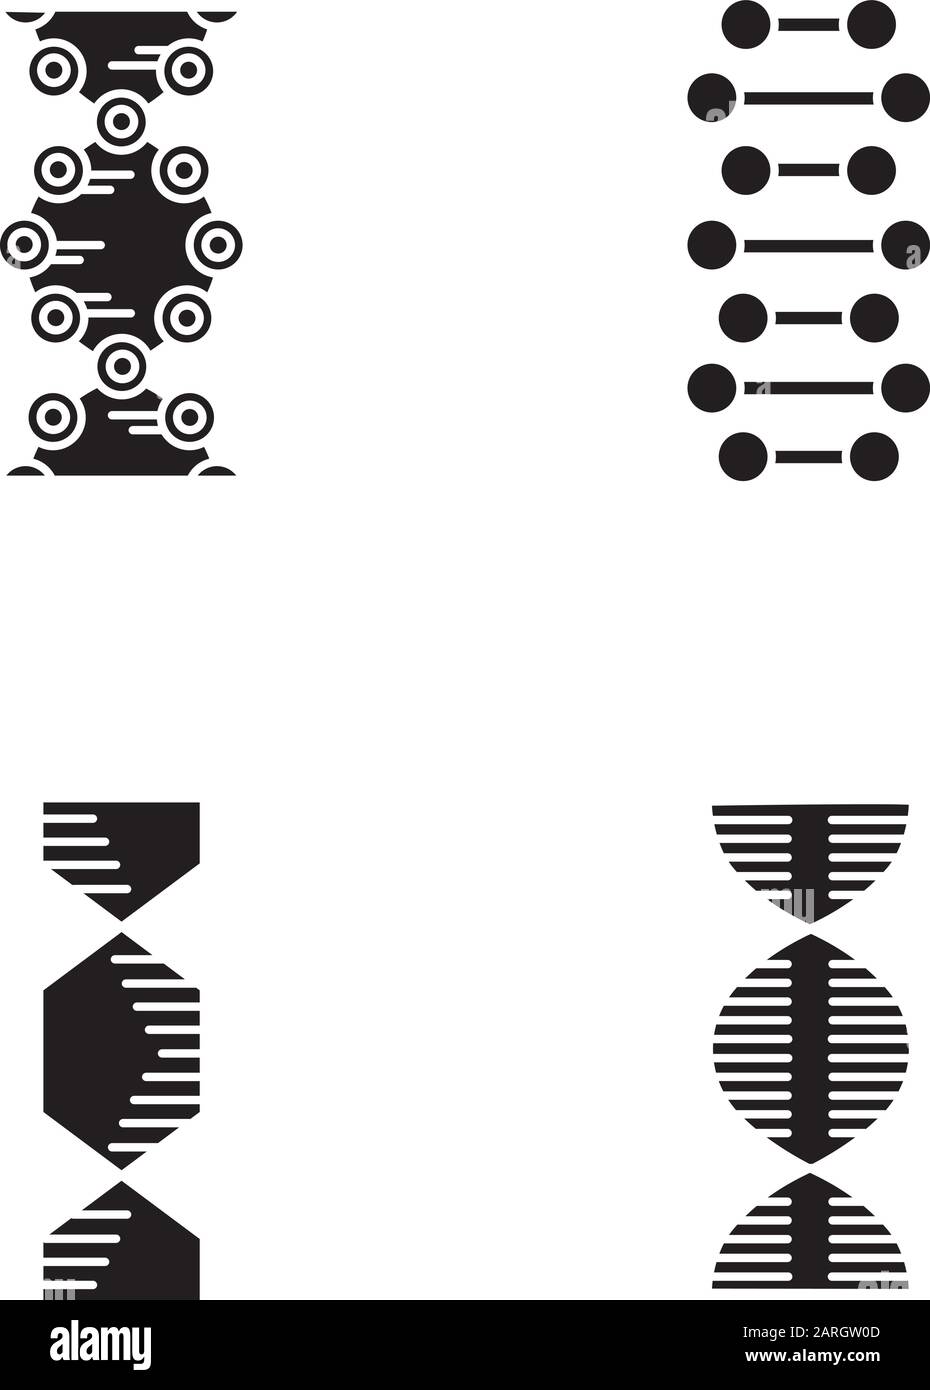 DNA spiral chains glyph icons set. Deoxyribonucleic, nucleic acid helix. Spiraling strands. Chromosome. Molecular biology. Genetic code. Genetics. Sil Stock Vector